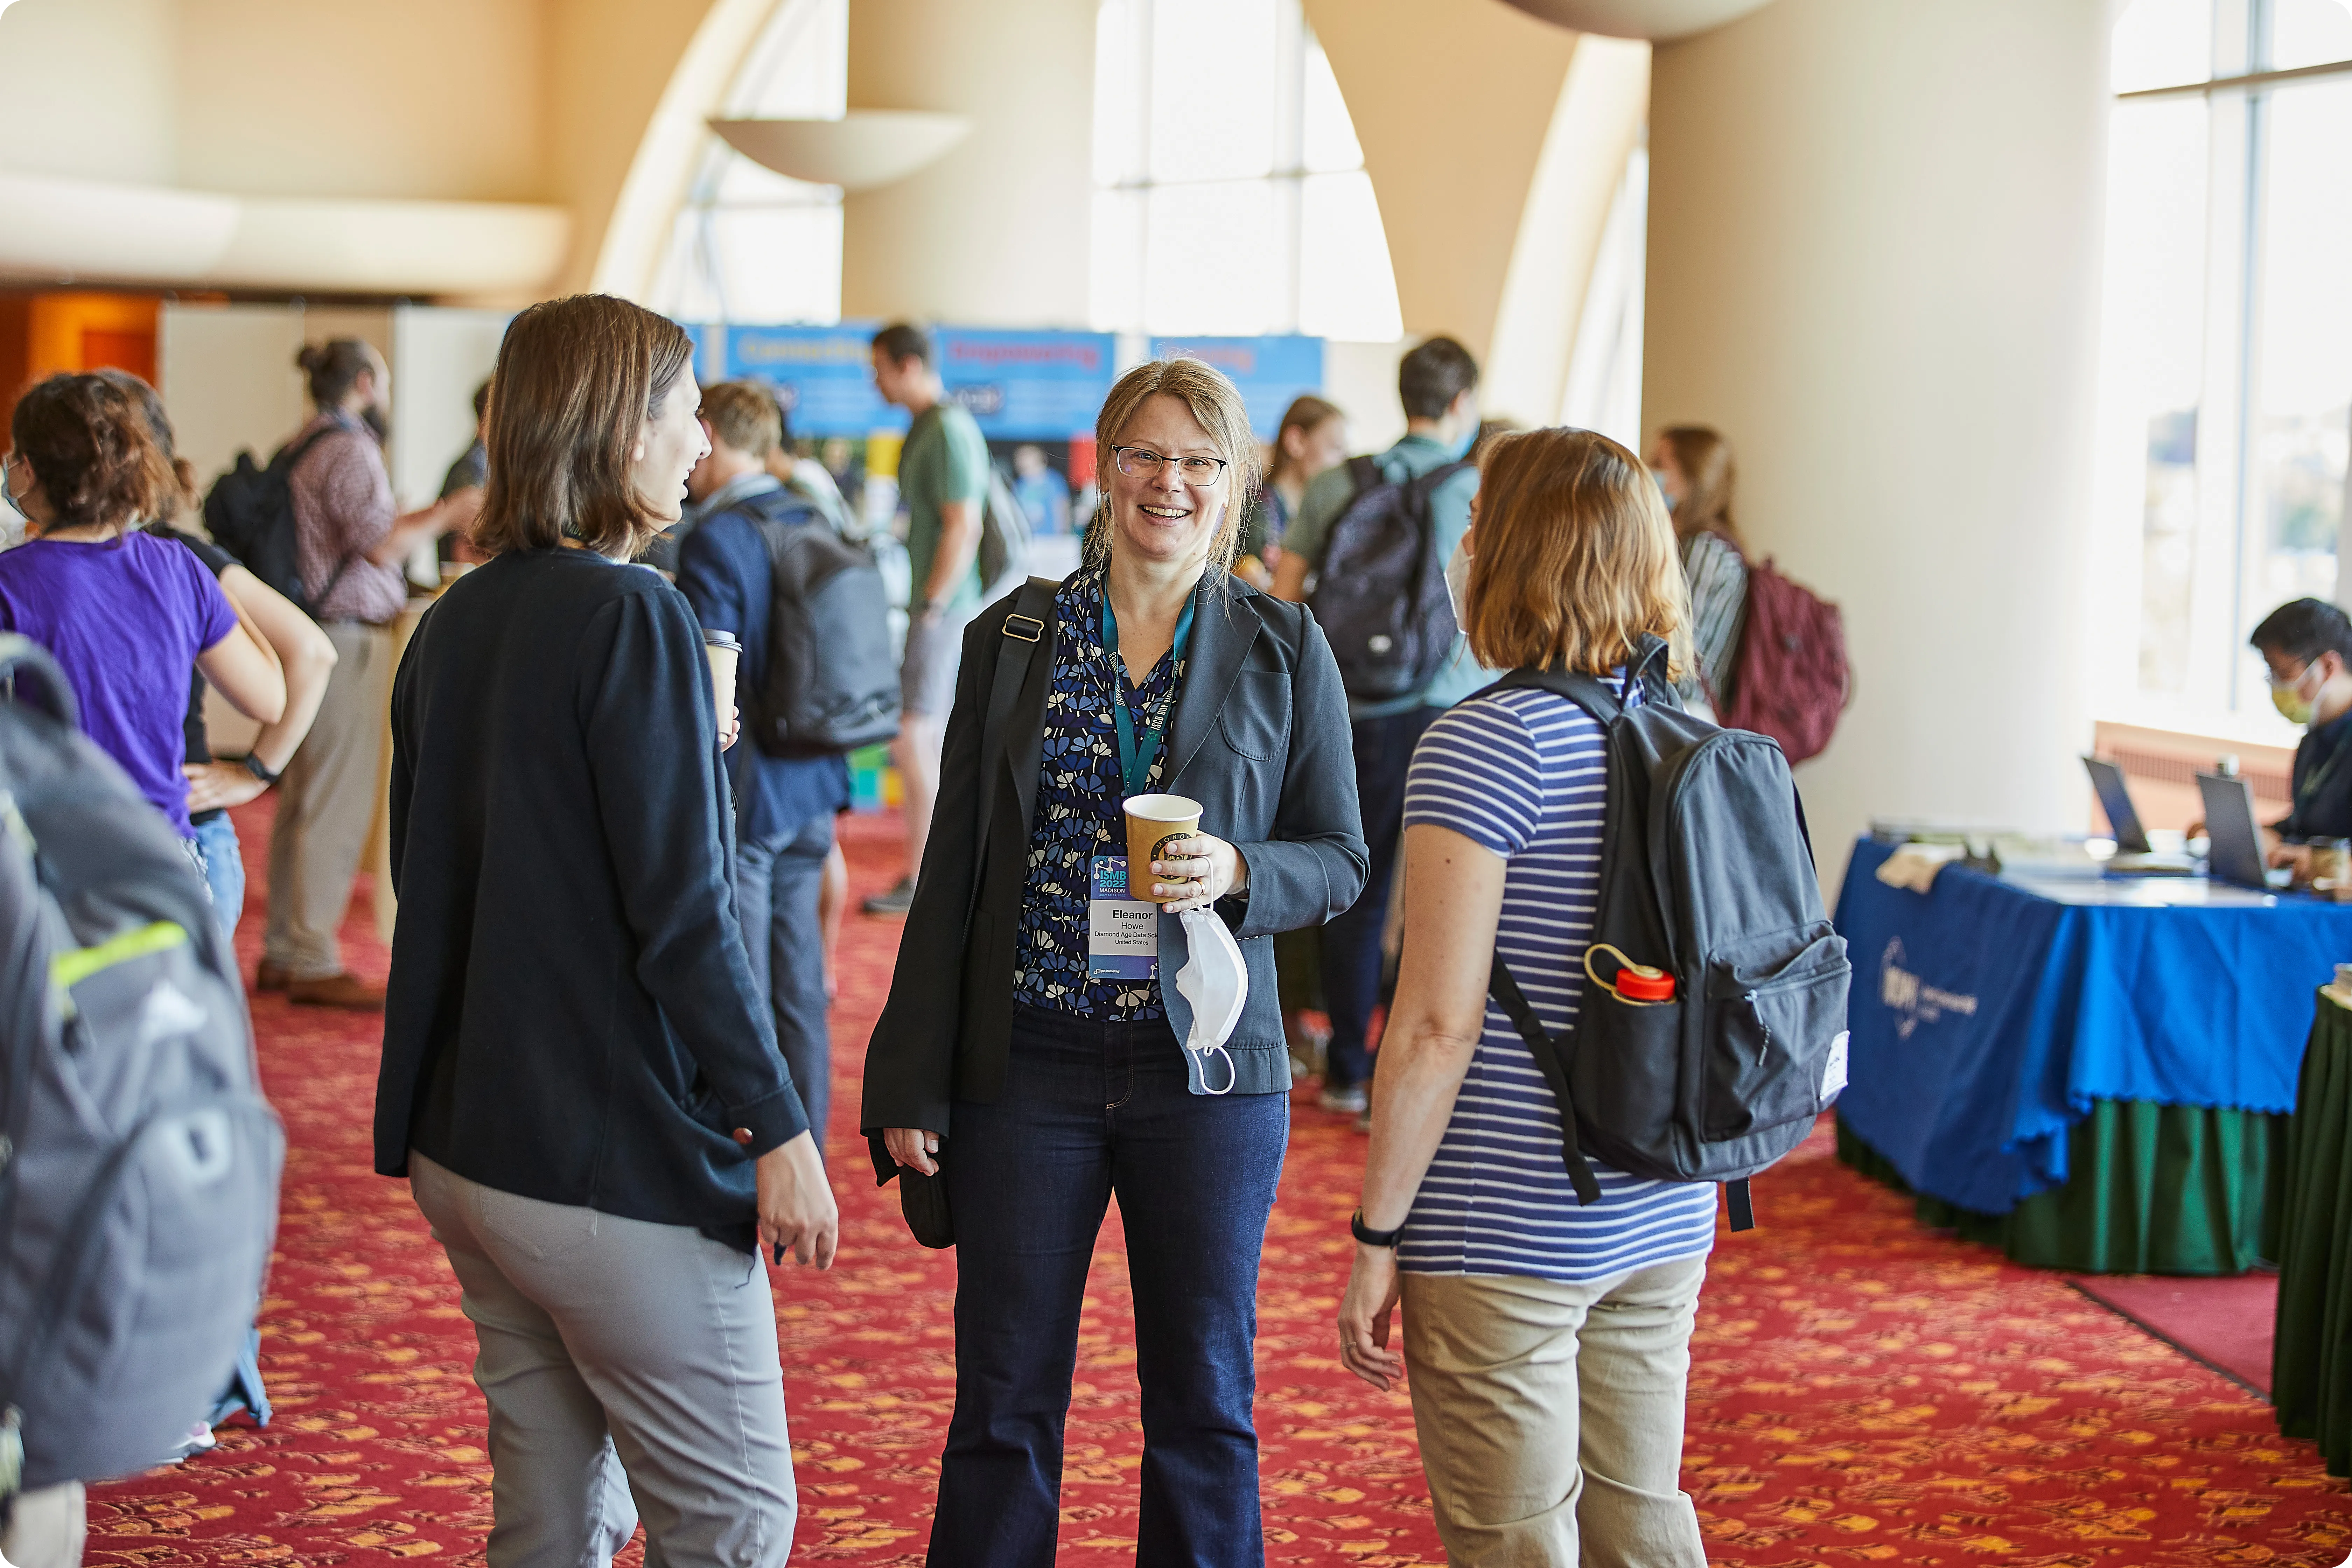 Attendees networking at the ISMB 2022 conference